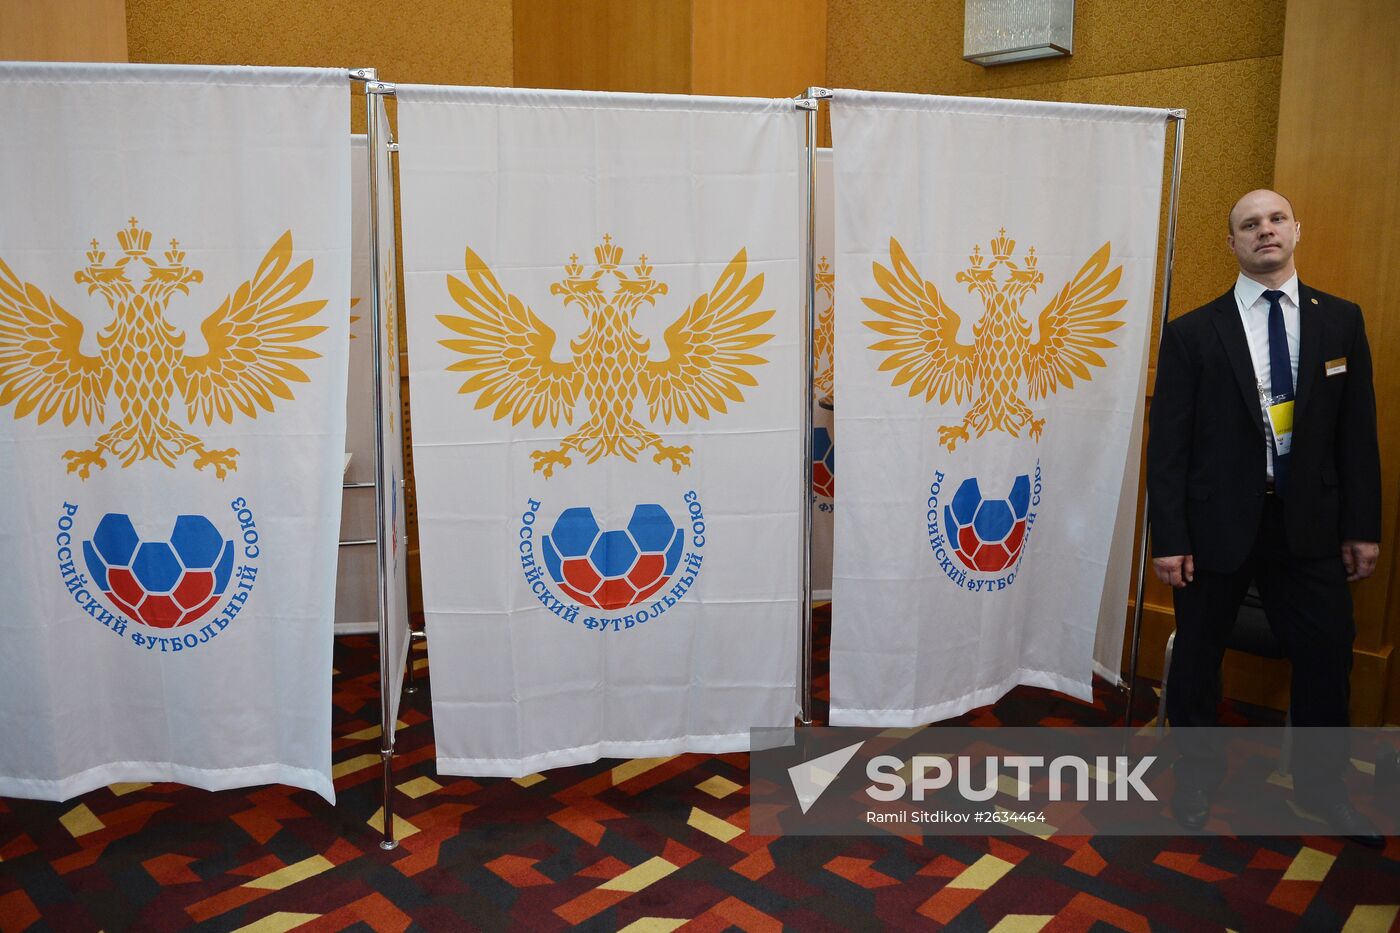 Conference of Russian Football Union